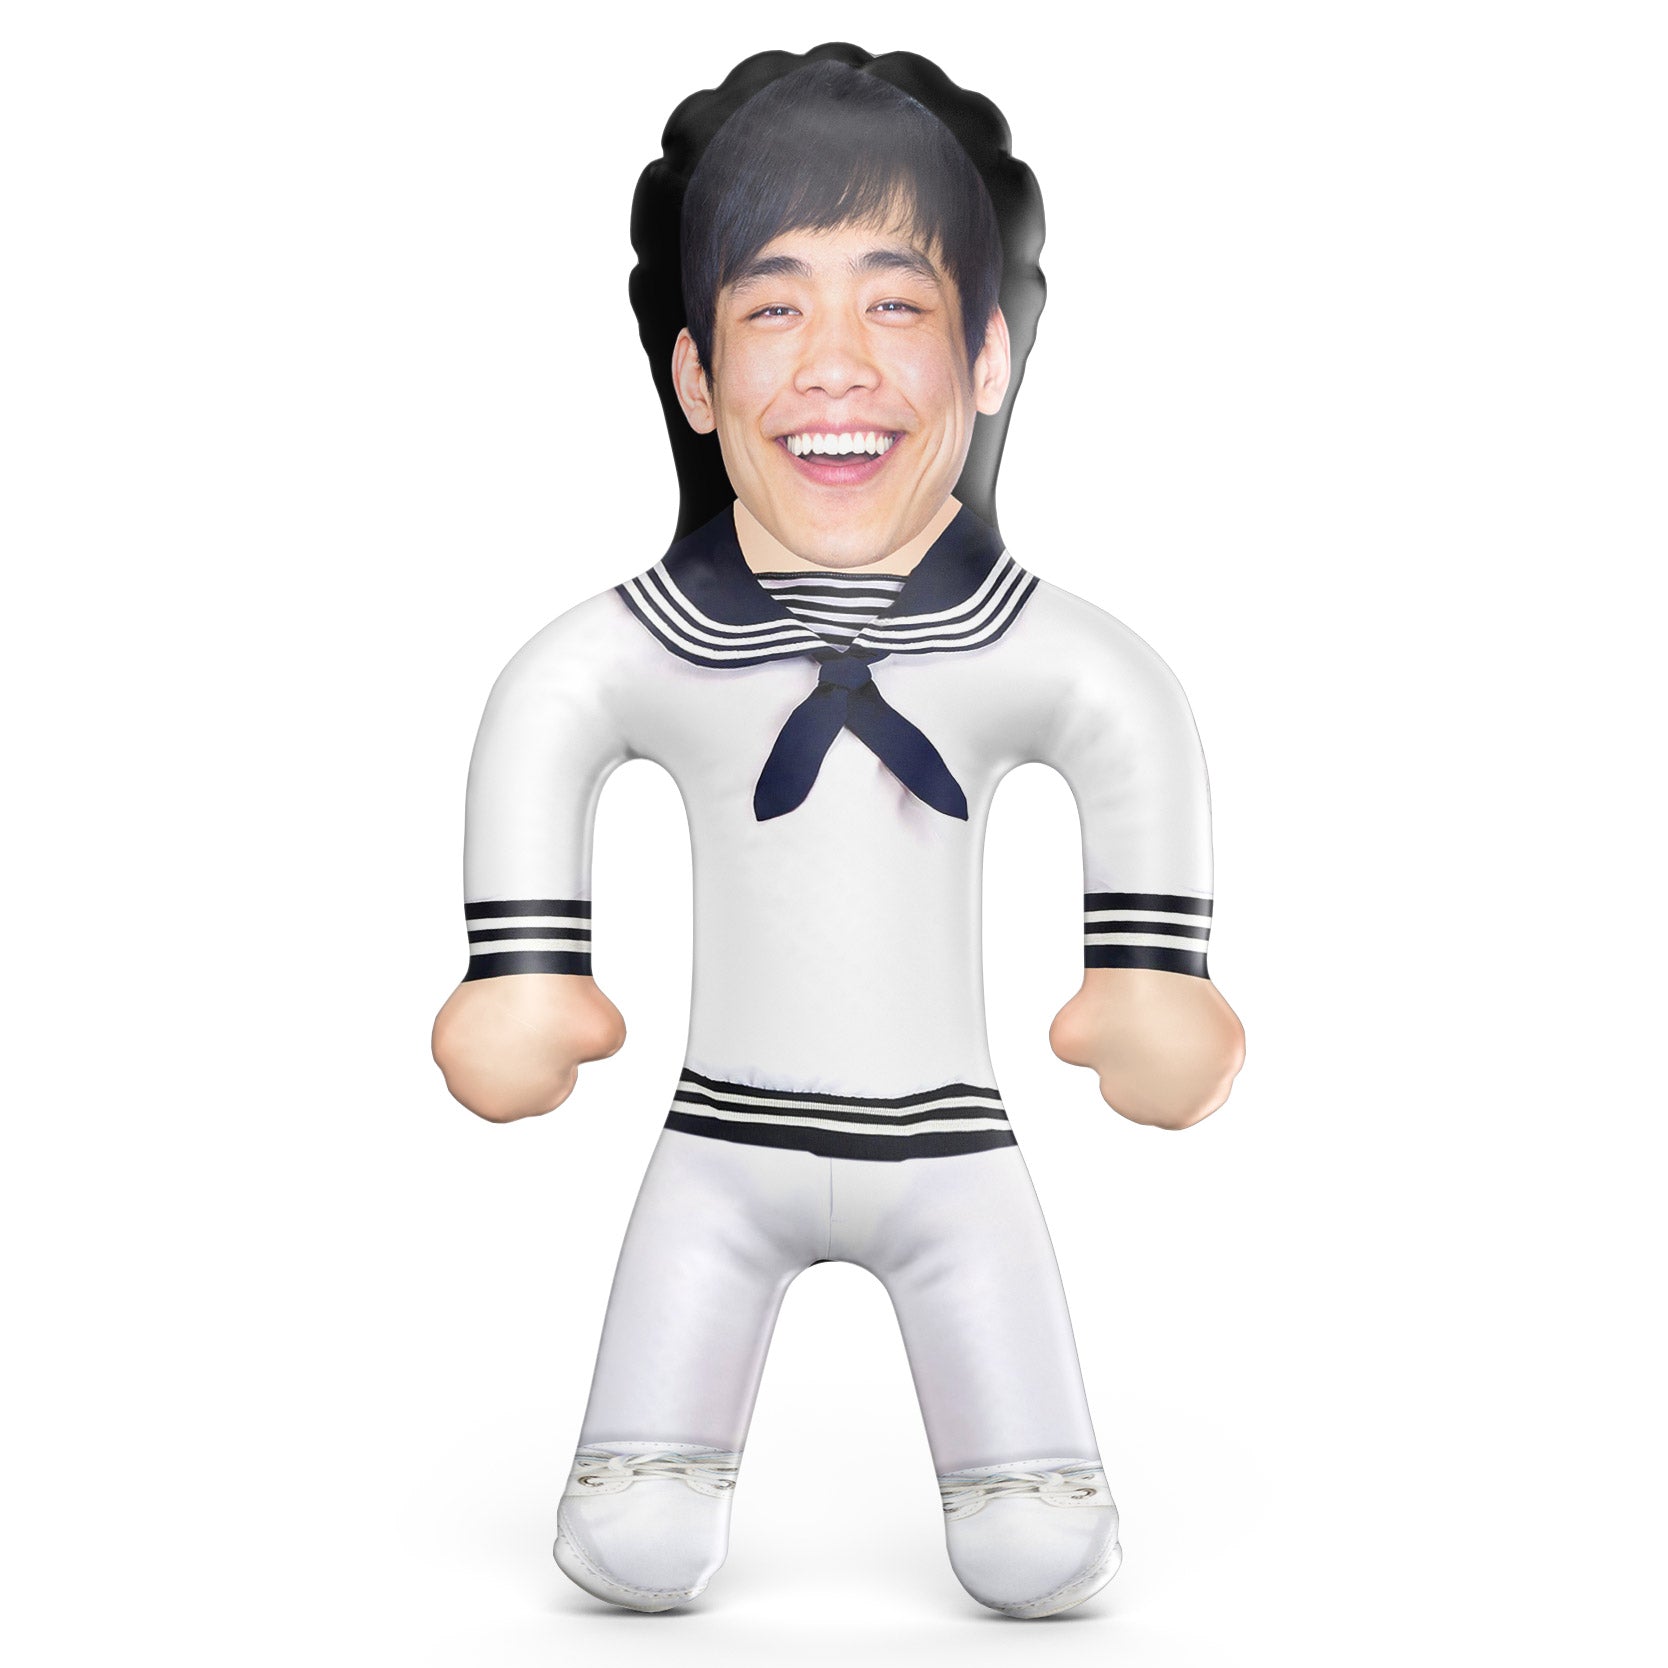 Sailor Inflatable Doll - Sailor Blow Up Doll